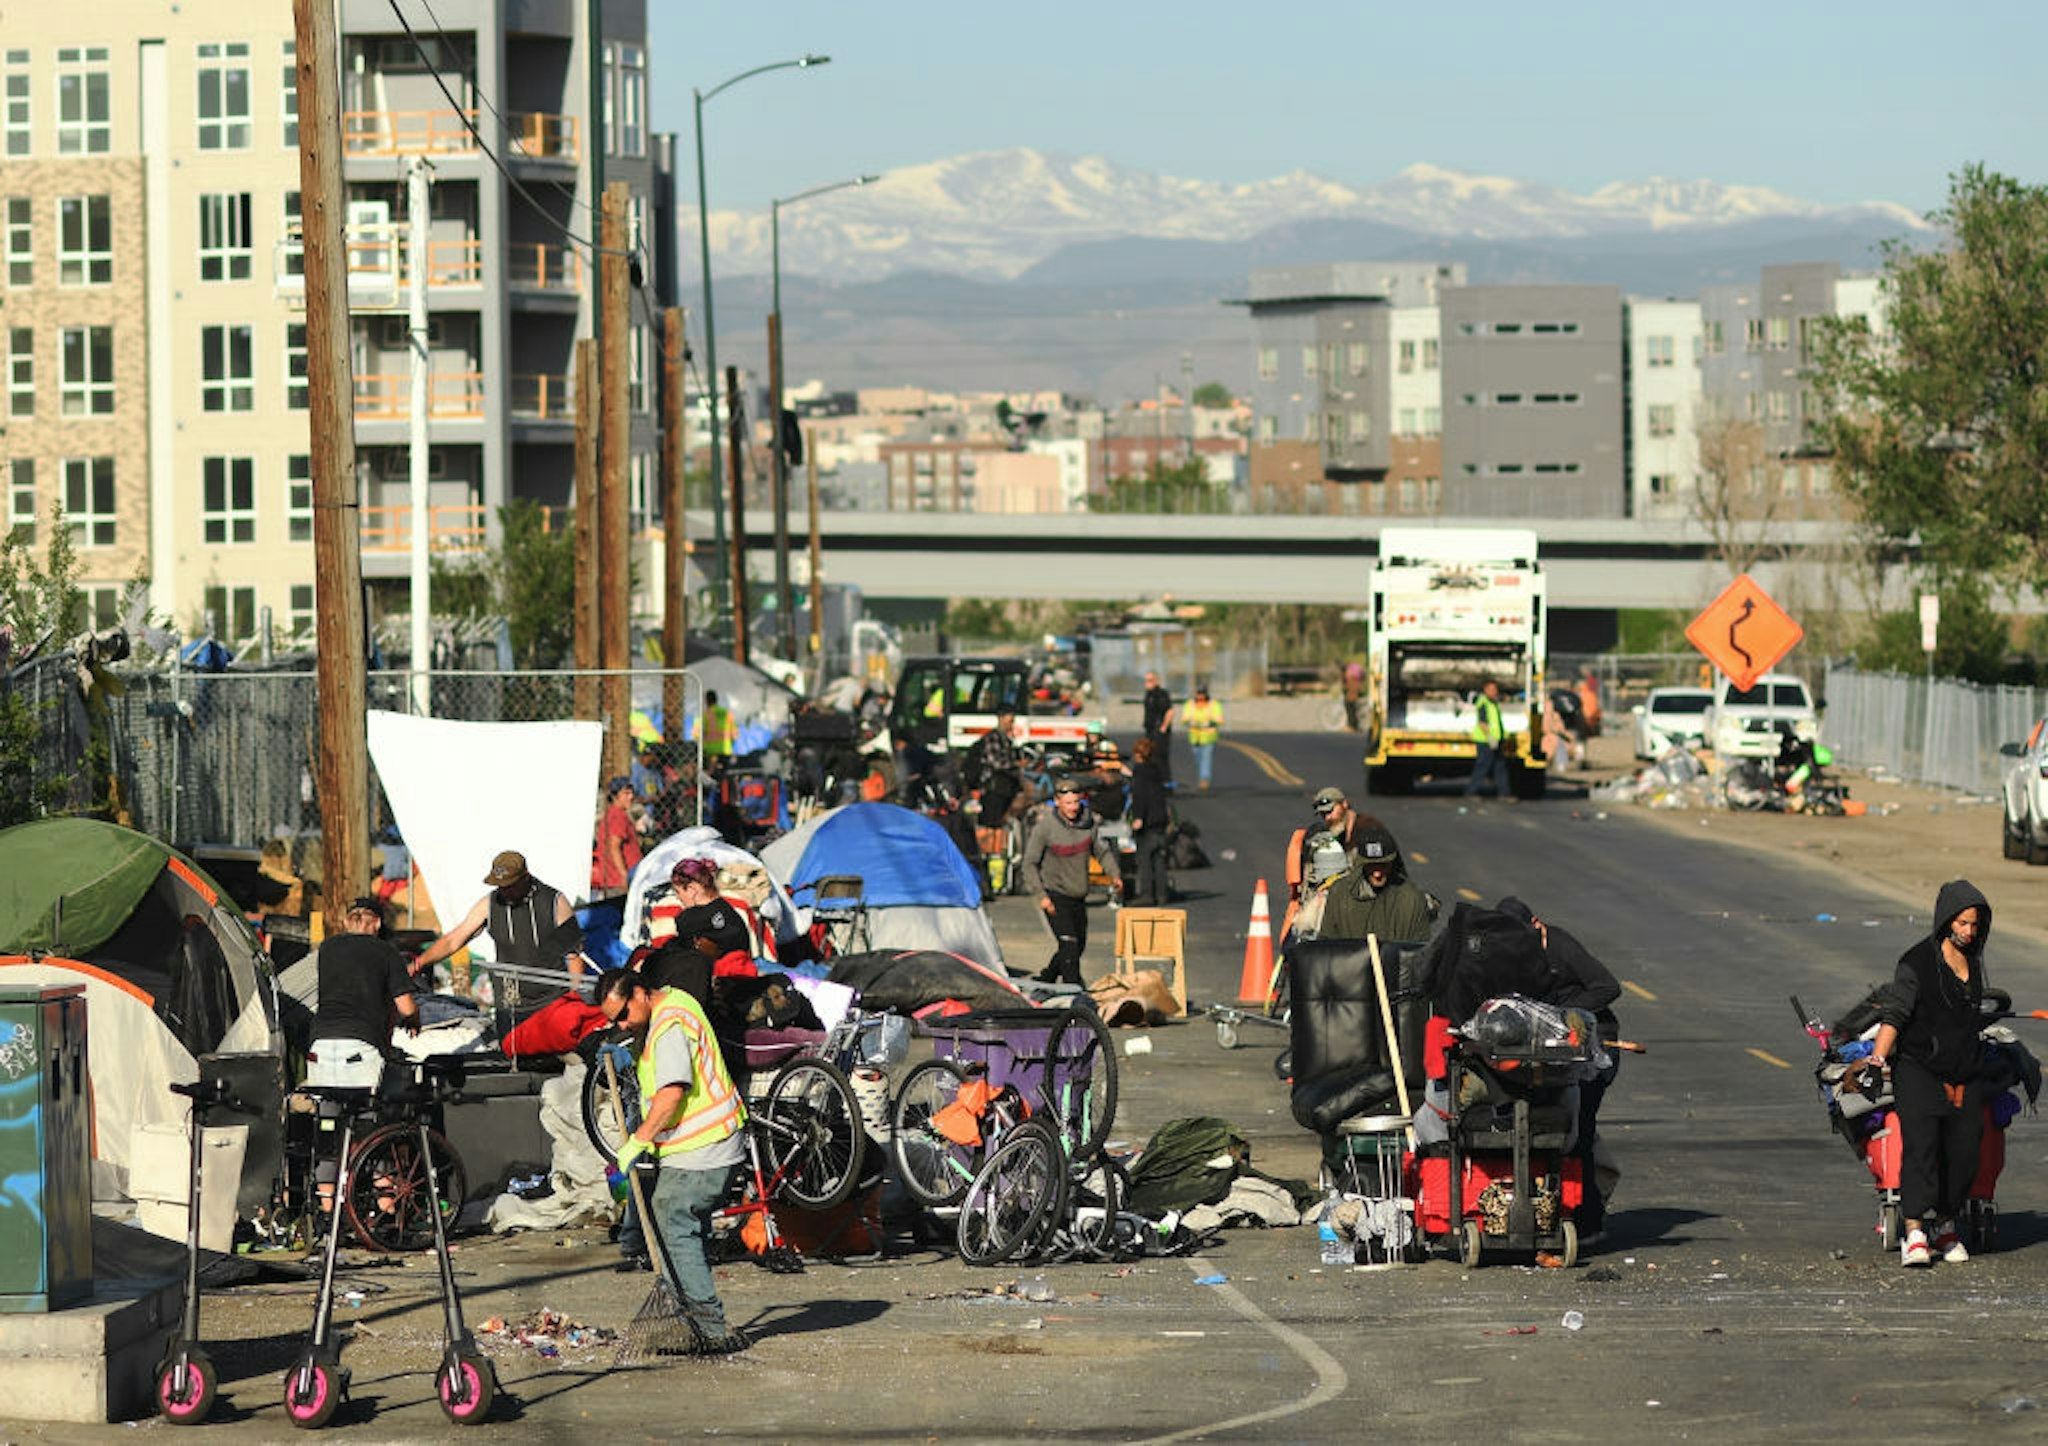 DENVER, COLORADO - MAY 17: People exercising homelessness gather belonging as crews work to cleanup a homeless camp in the RiNo neighborhood near the Platte River on May 17, 2022 in Denver, Colorado.(Photo by RJ Sangosti/MediaNews Group/The Denver Post via Getty Images)"n"n